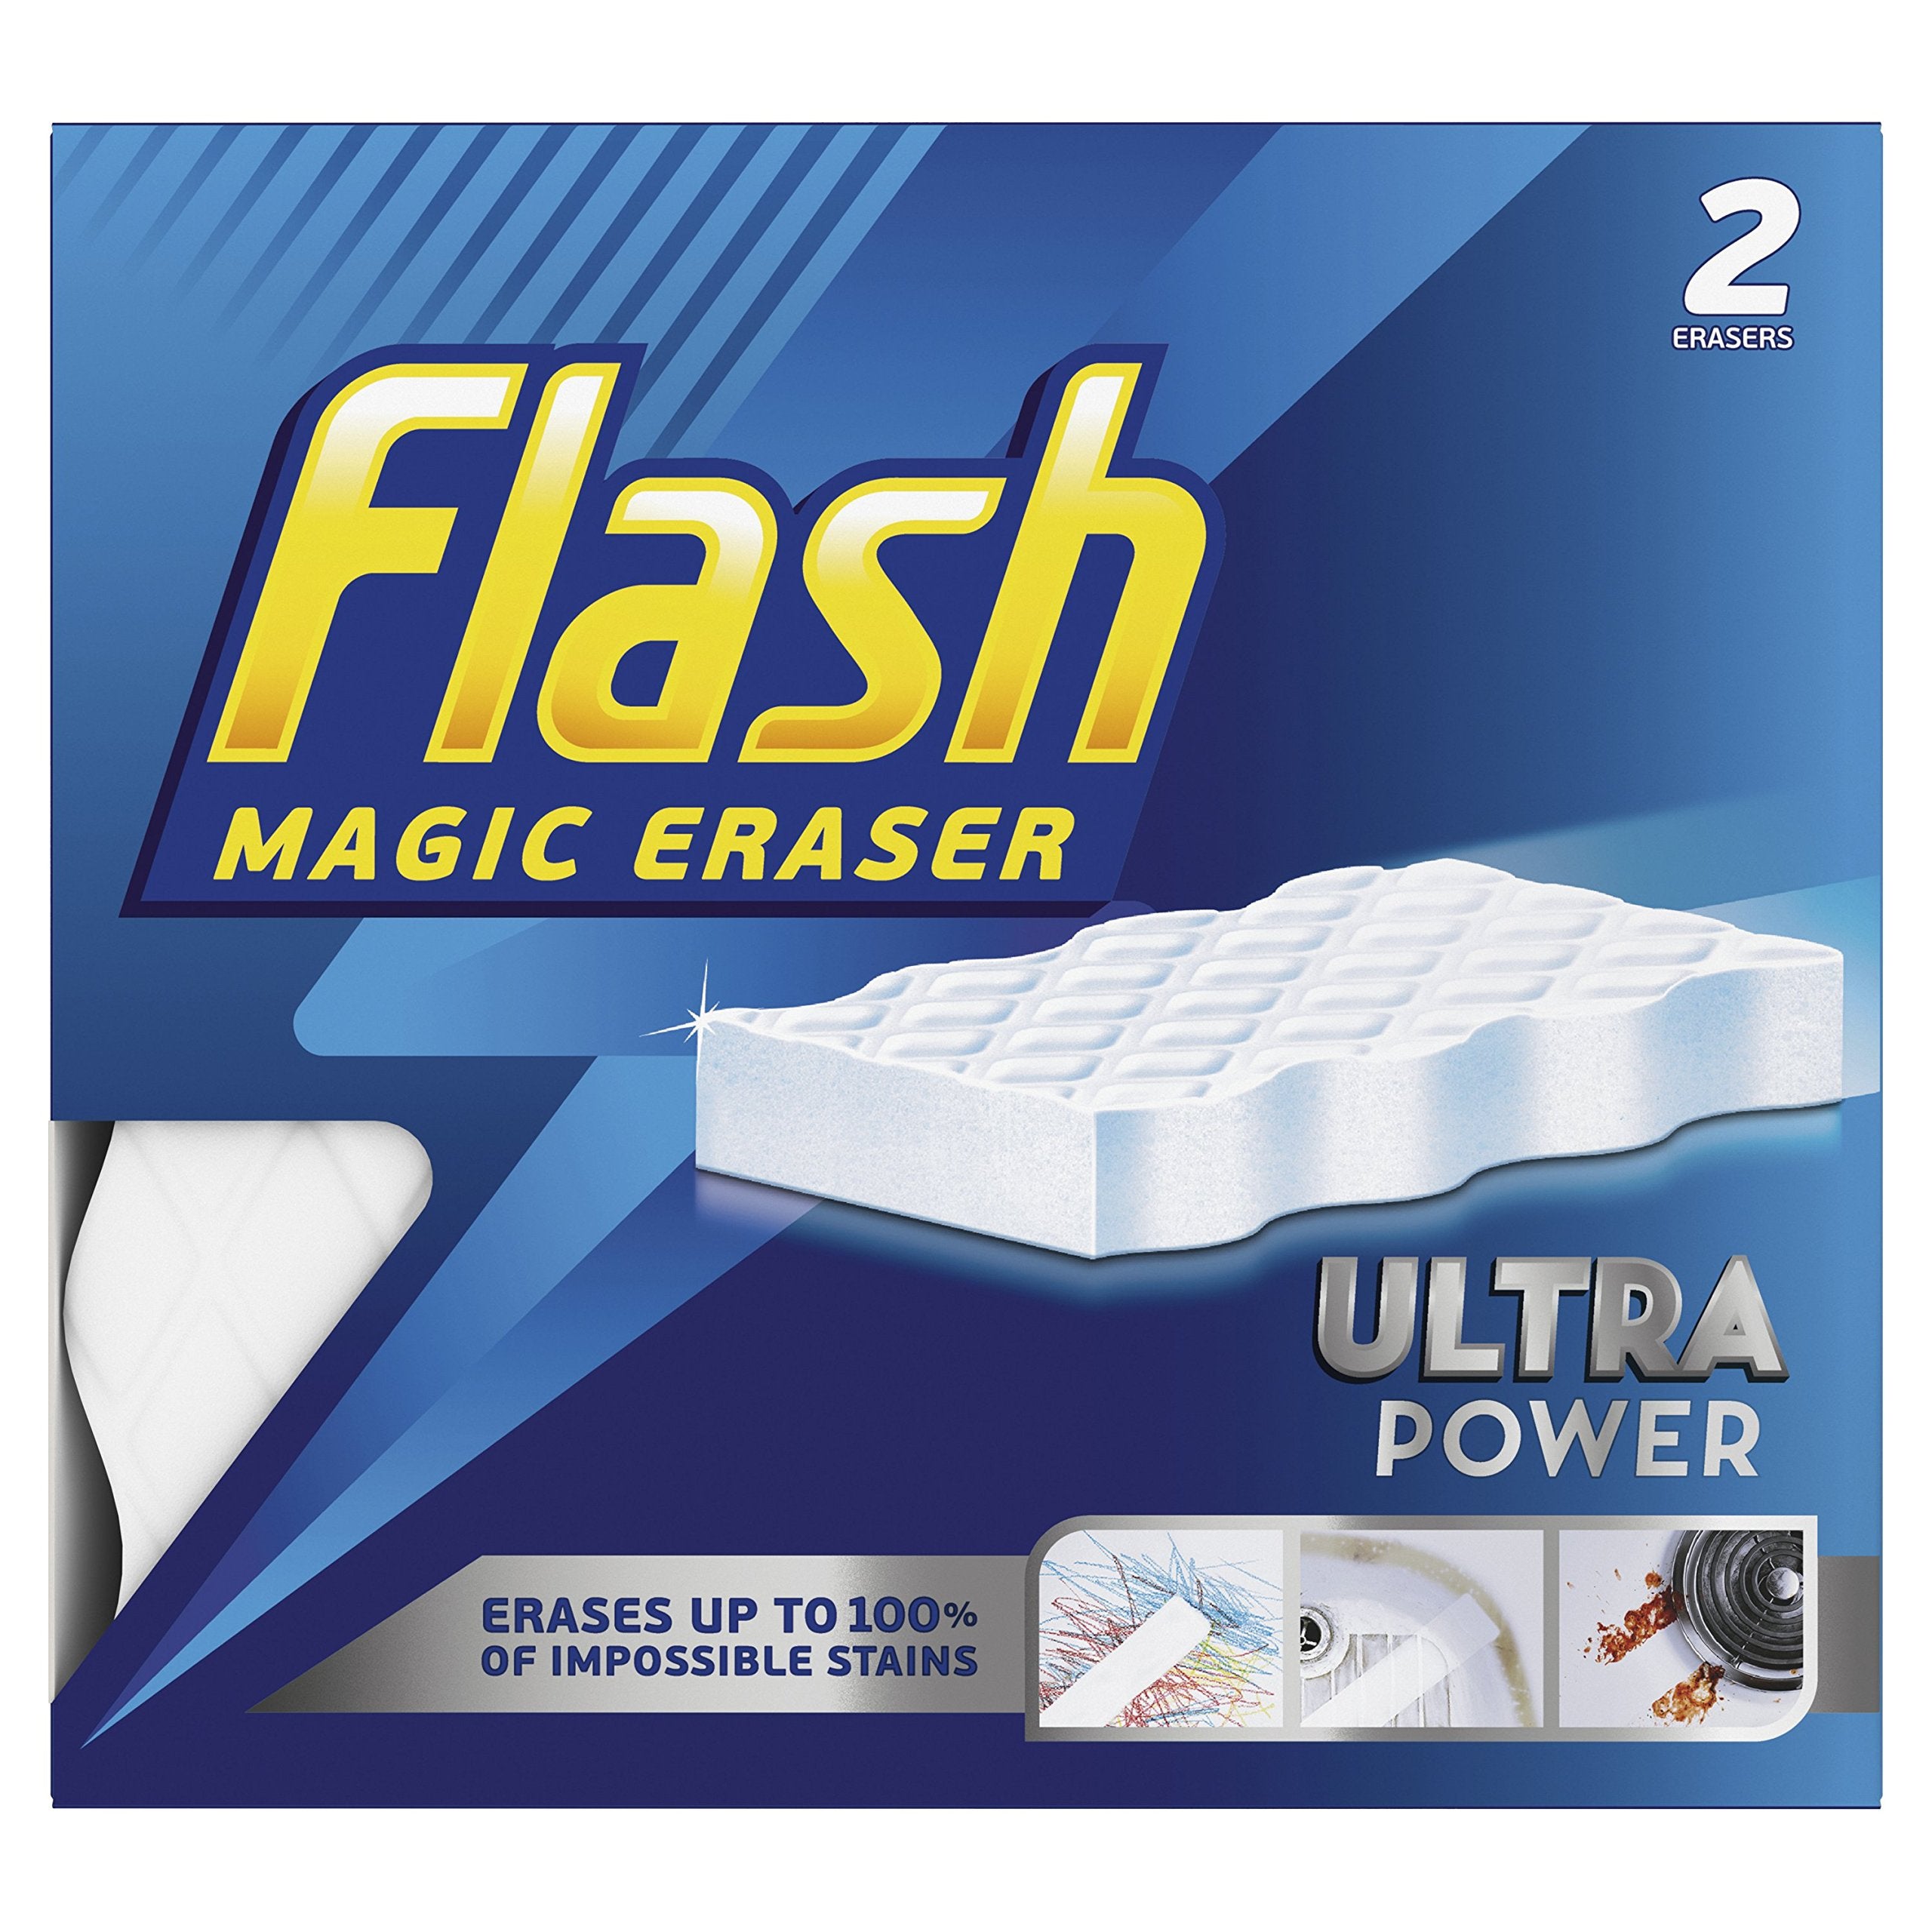 Flash Ultra Power Magic Eraser, Removes Impossible Stains Like Crayon on Walls, Tough Grease on Hobs or Grime on Wheel Hubs, 2X